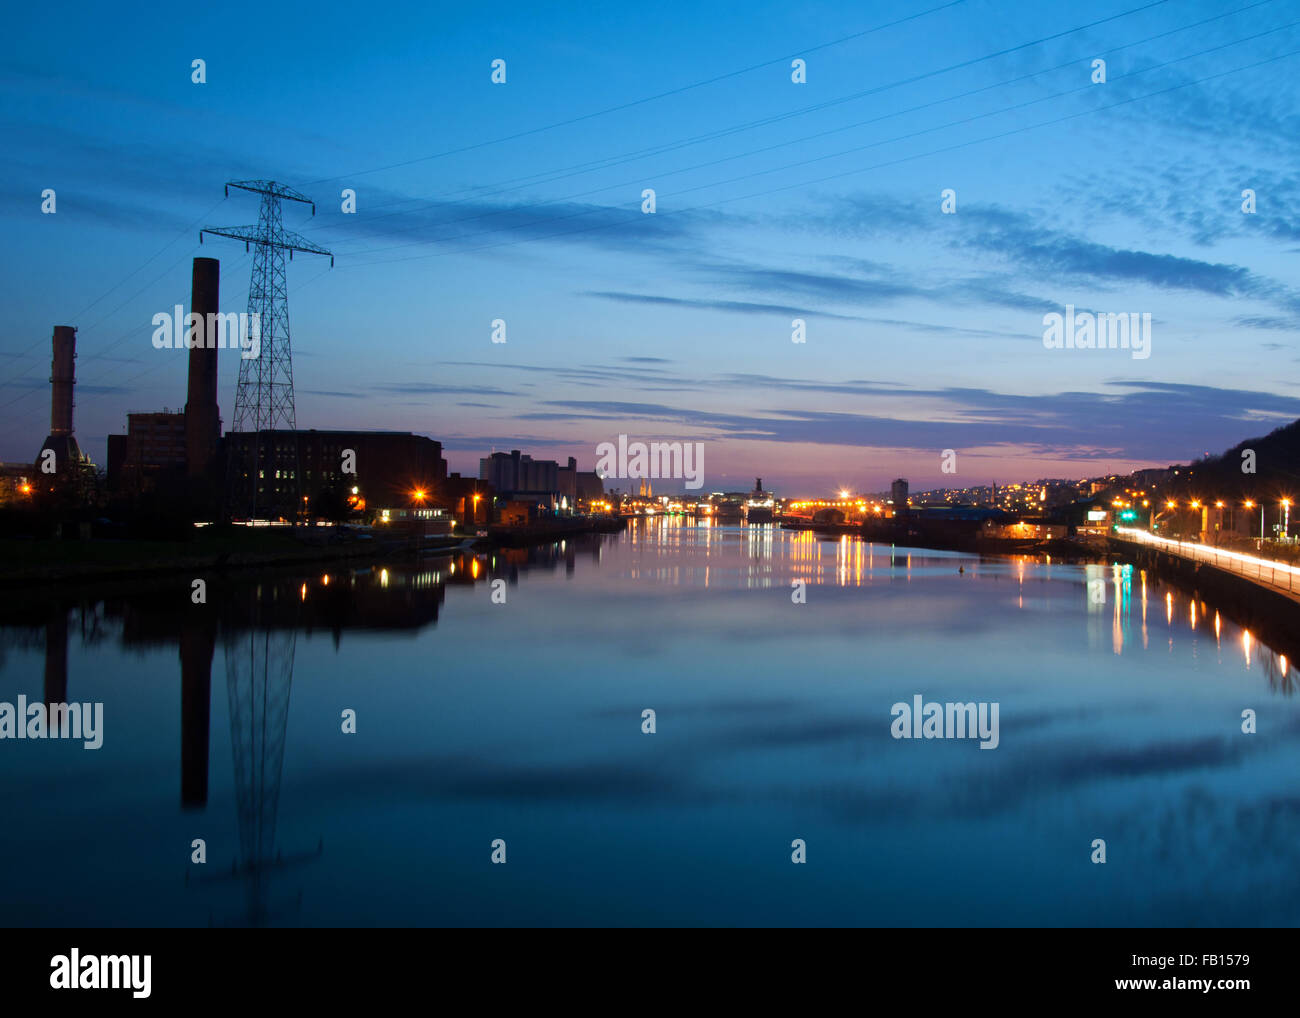 The ESB building and Cork City docks on the River Lee, Cork, Ireland, at night. Stock Photo